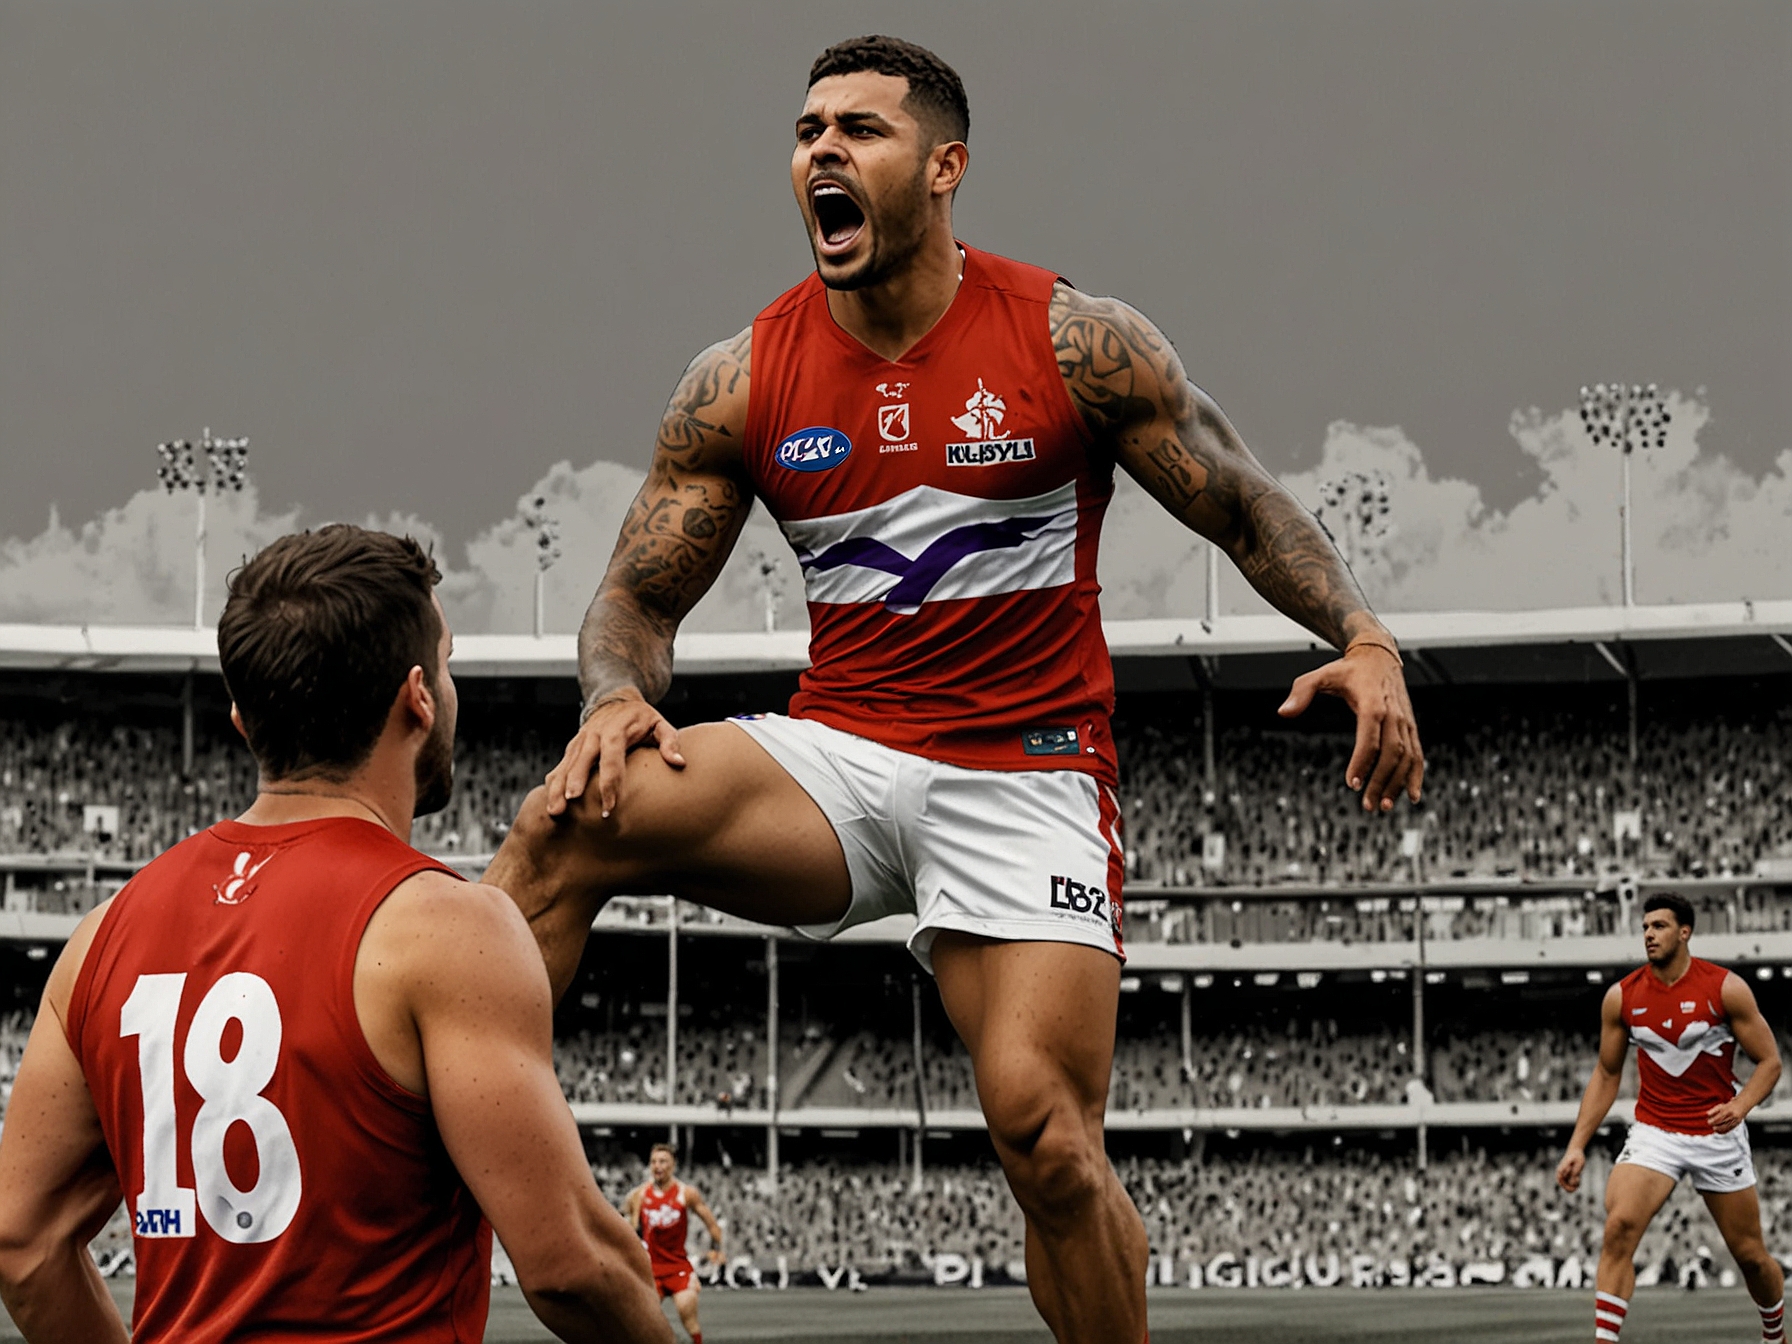 The league-leading Sydney Swans host the Fremantle Dockers at their home ground, driven by the exceptional talents of Lance Franklin and Tom Papley with the support of their passionate fans.